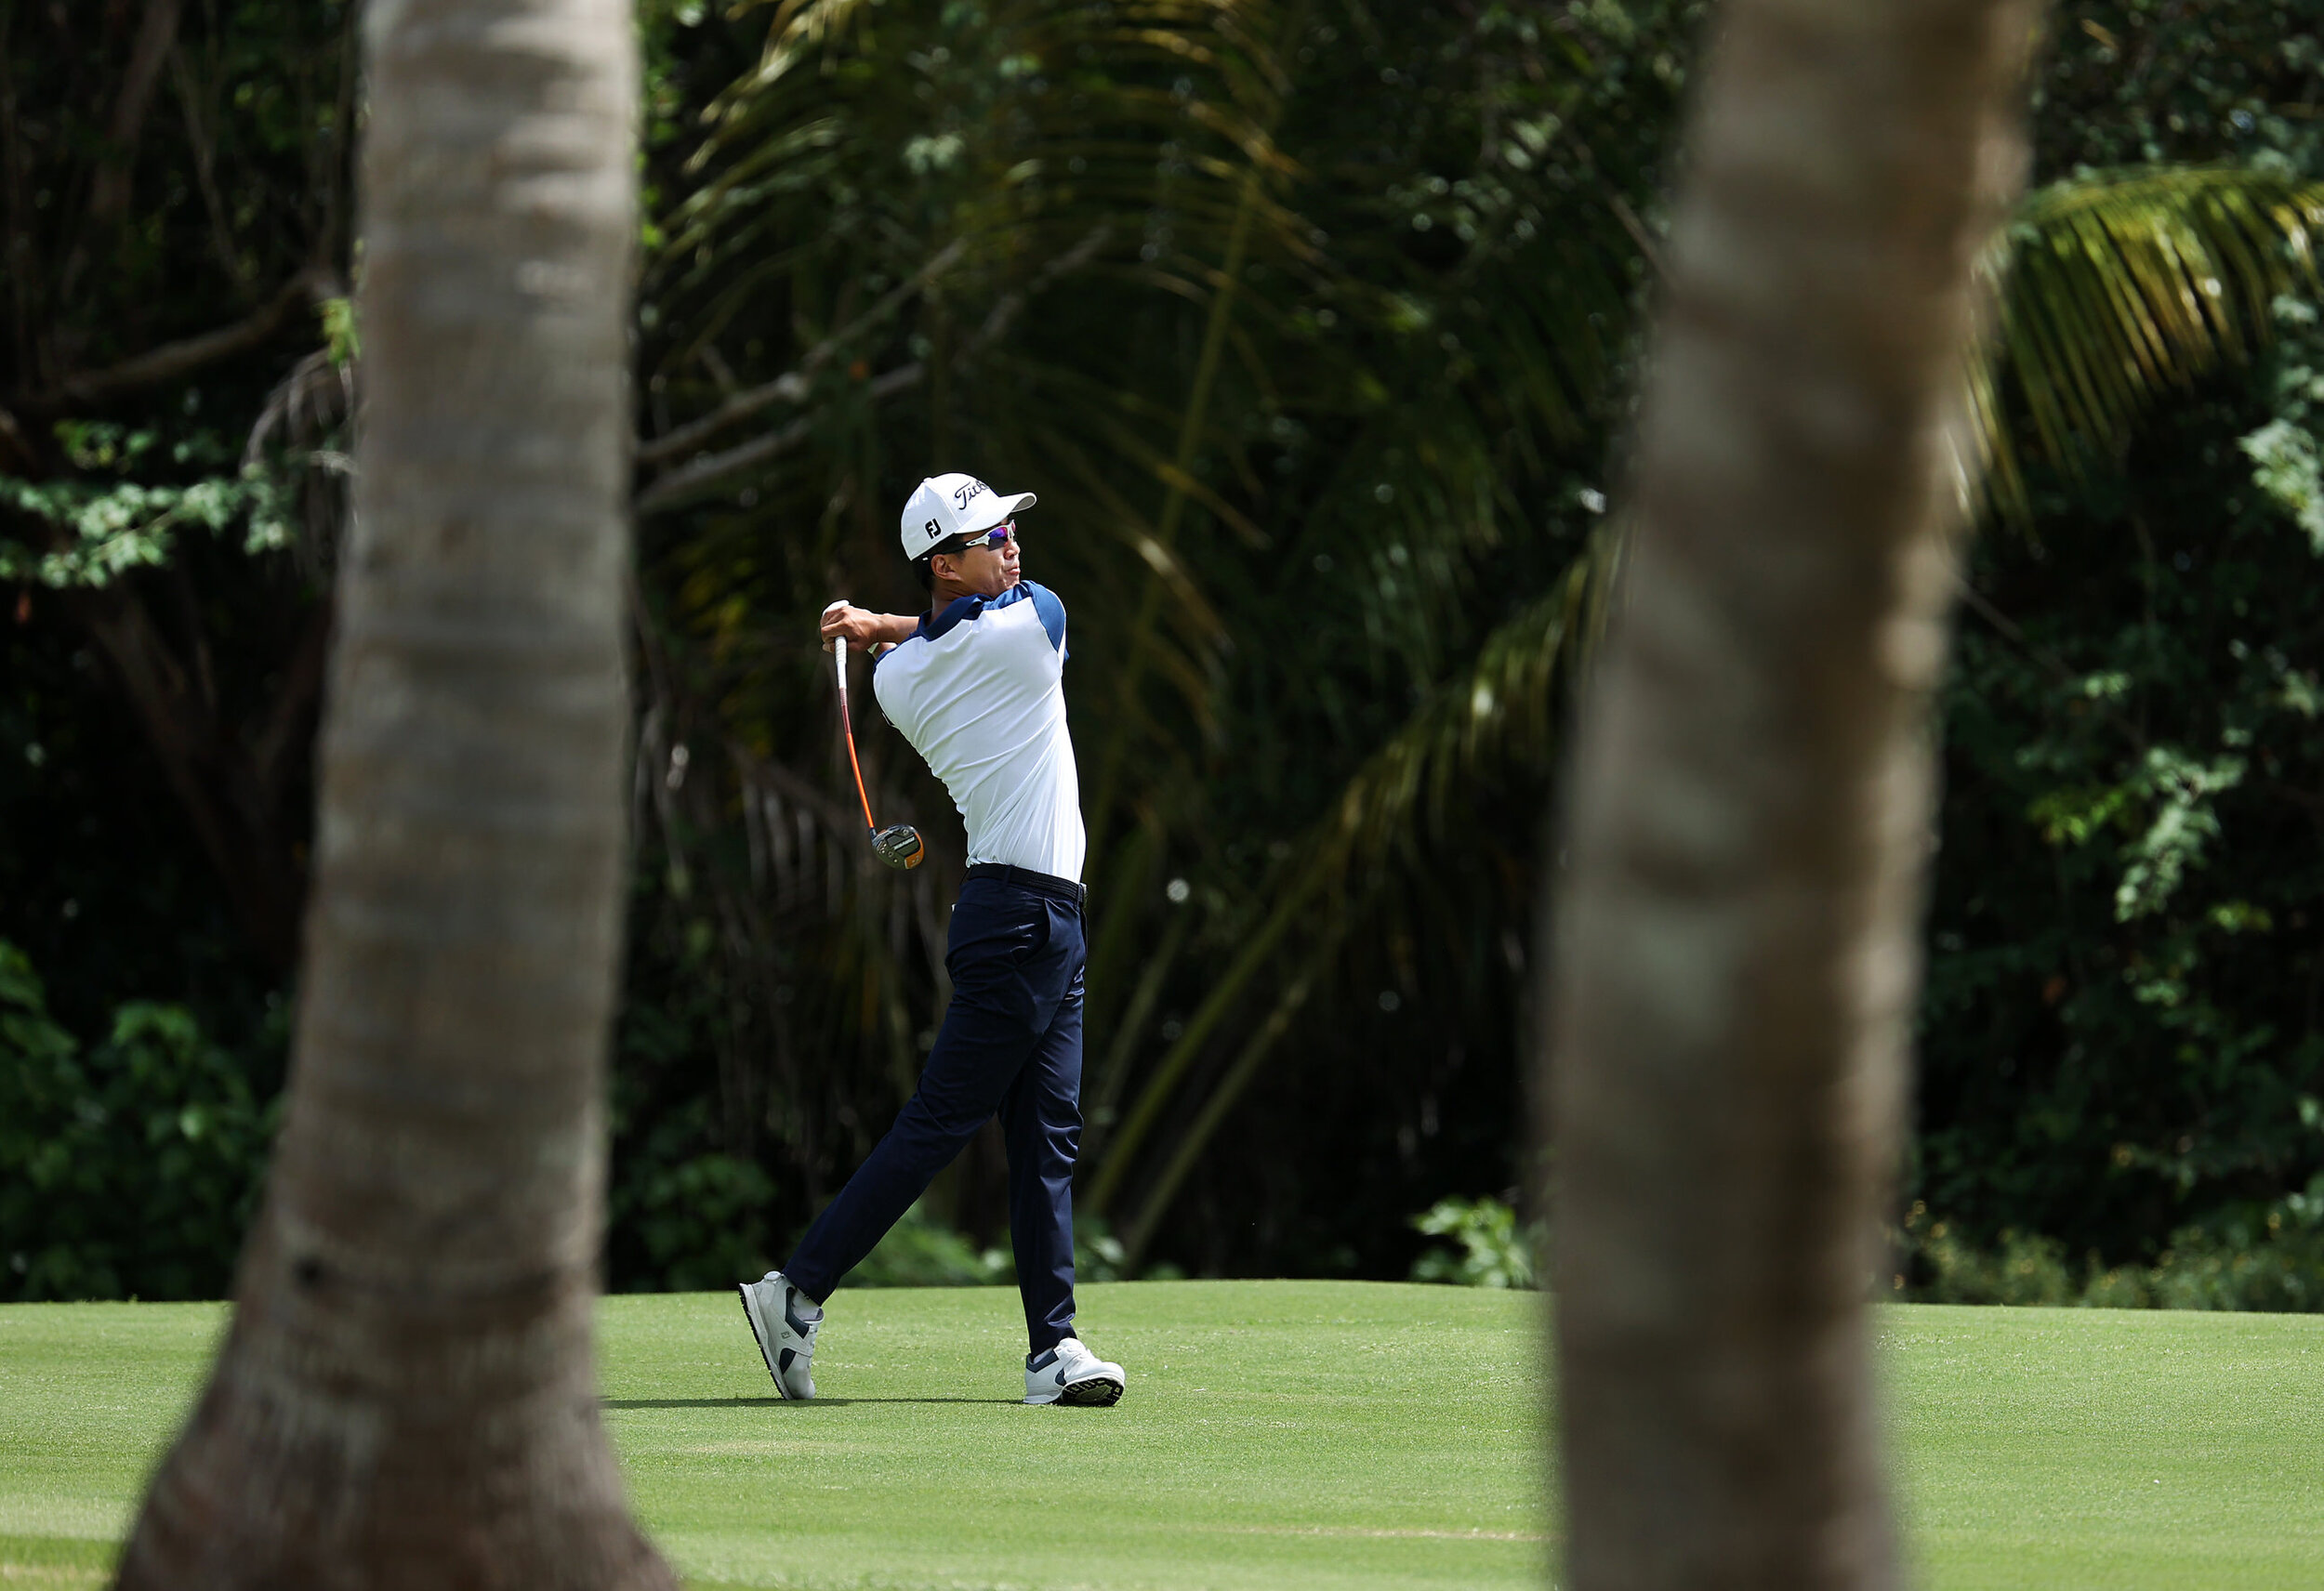  RIO GRANDE, PUERTO RICO - FEBRUARY 25: Michael Kim plays his second shot on the 18th hole during the first round of the Puerto Rico Open at Grand Reserve Country Club on February 25, 2021 in Rio Grande, Puerto Rico.  (Photo by Andy Lyons/Getty Image